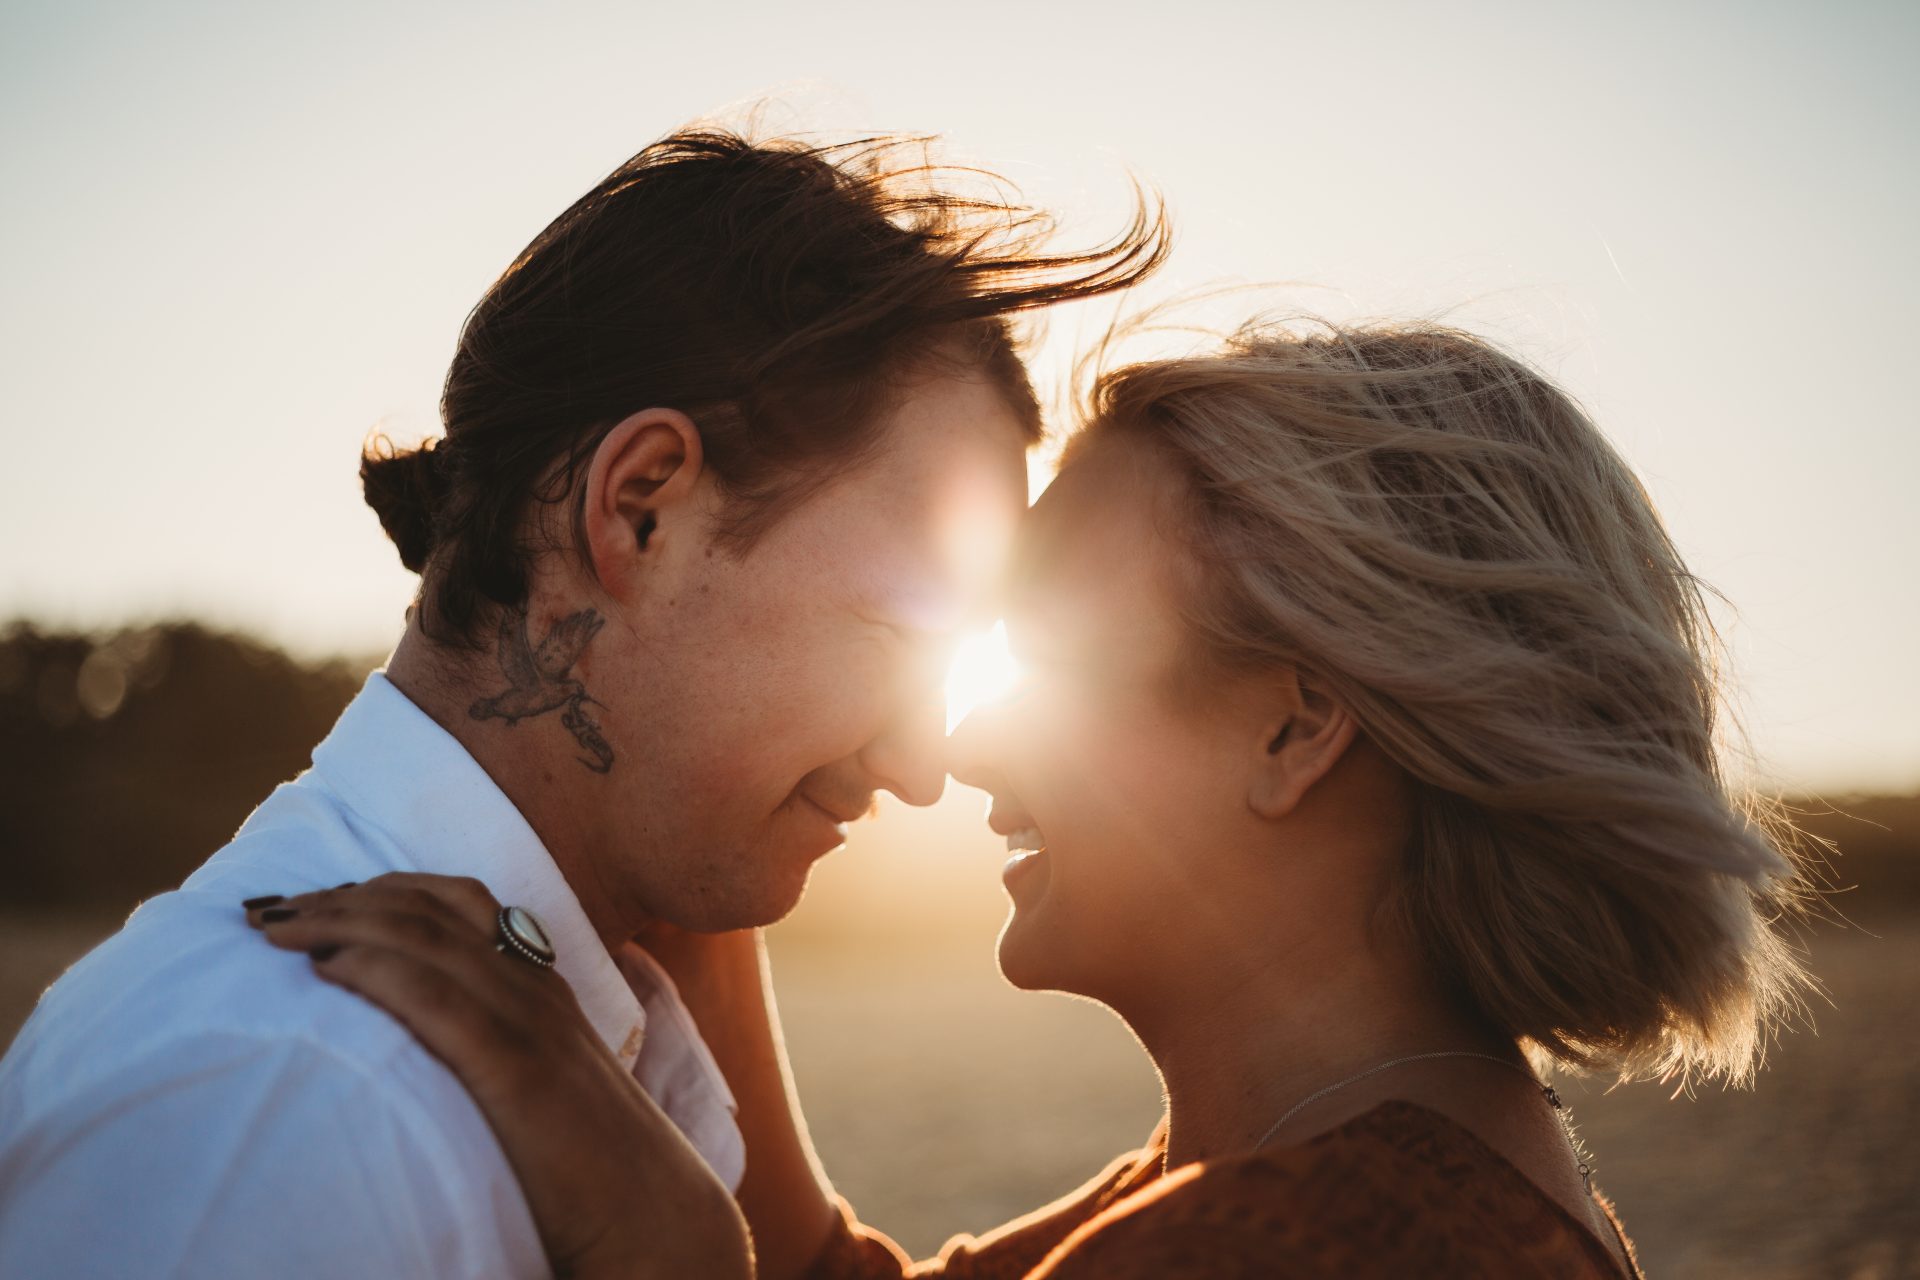 Sun flare between the faces of young couple touching faces together